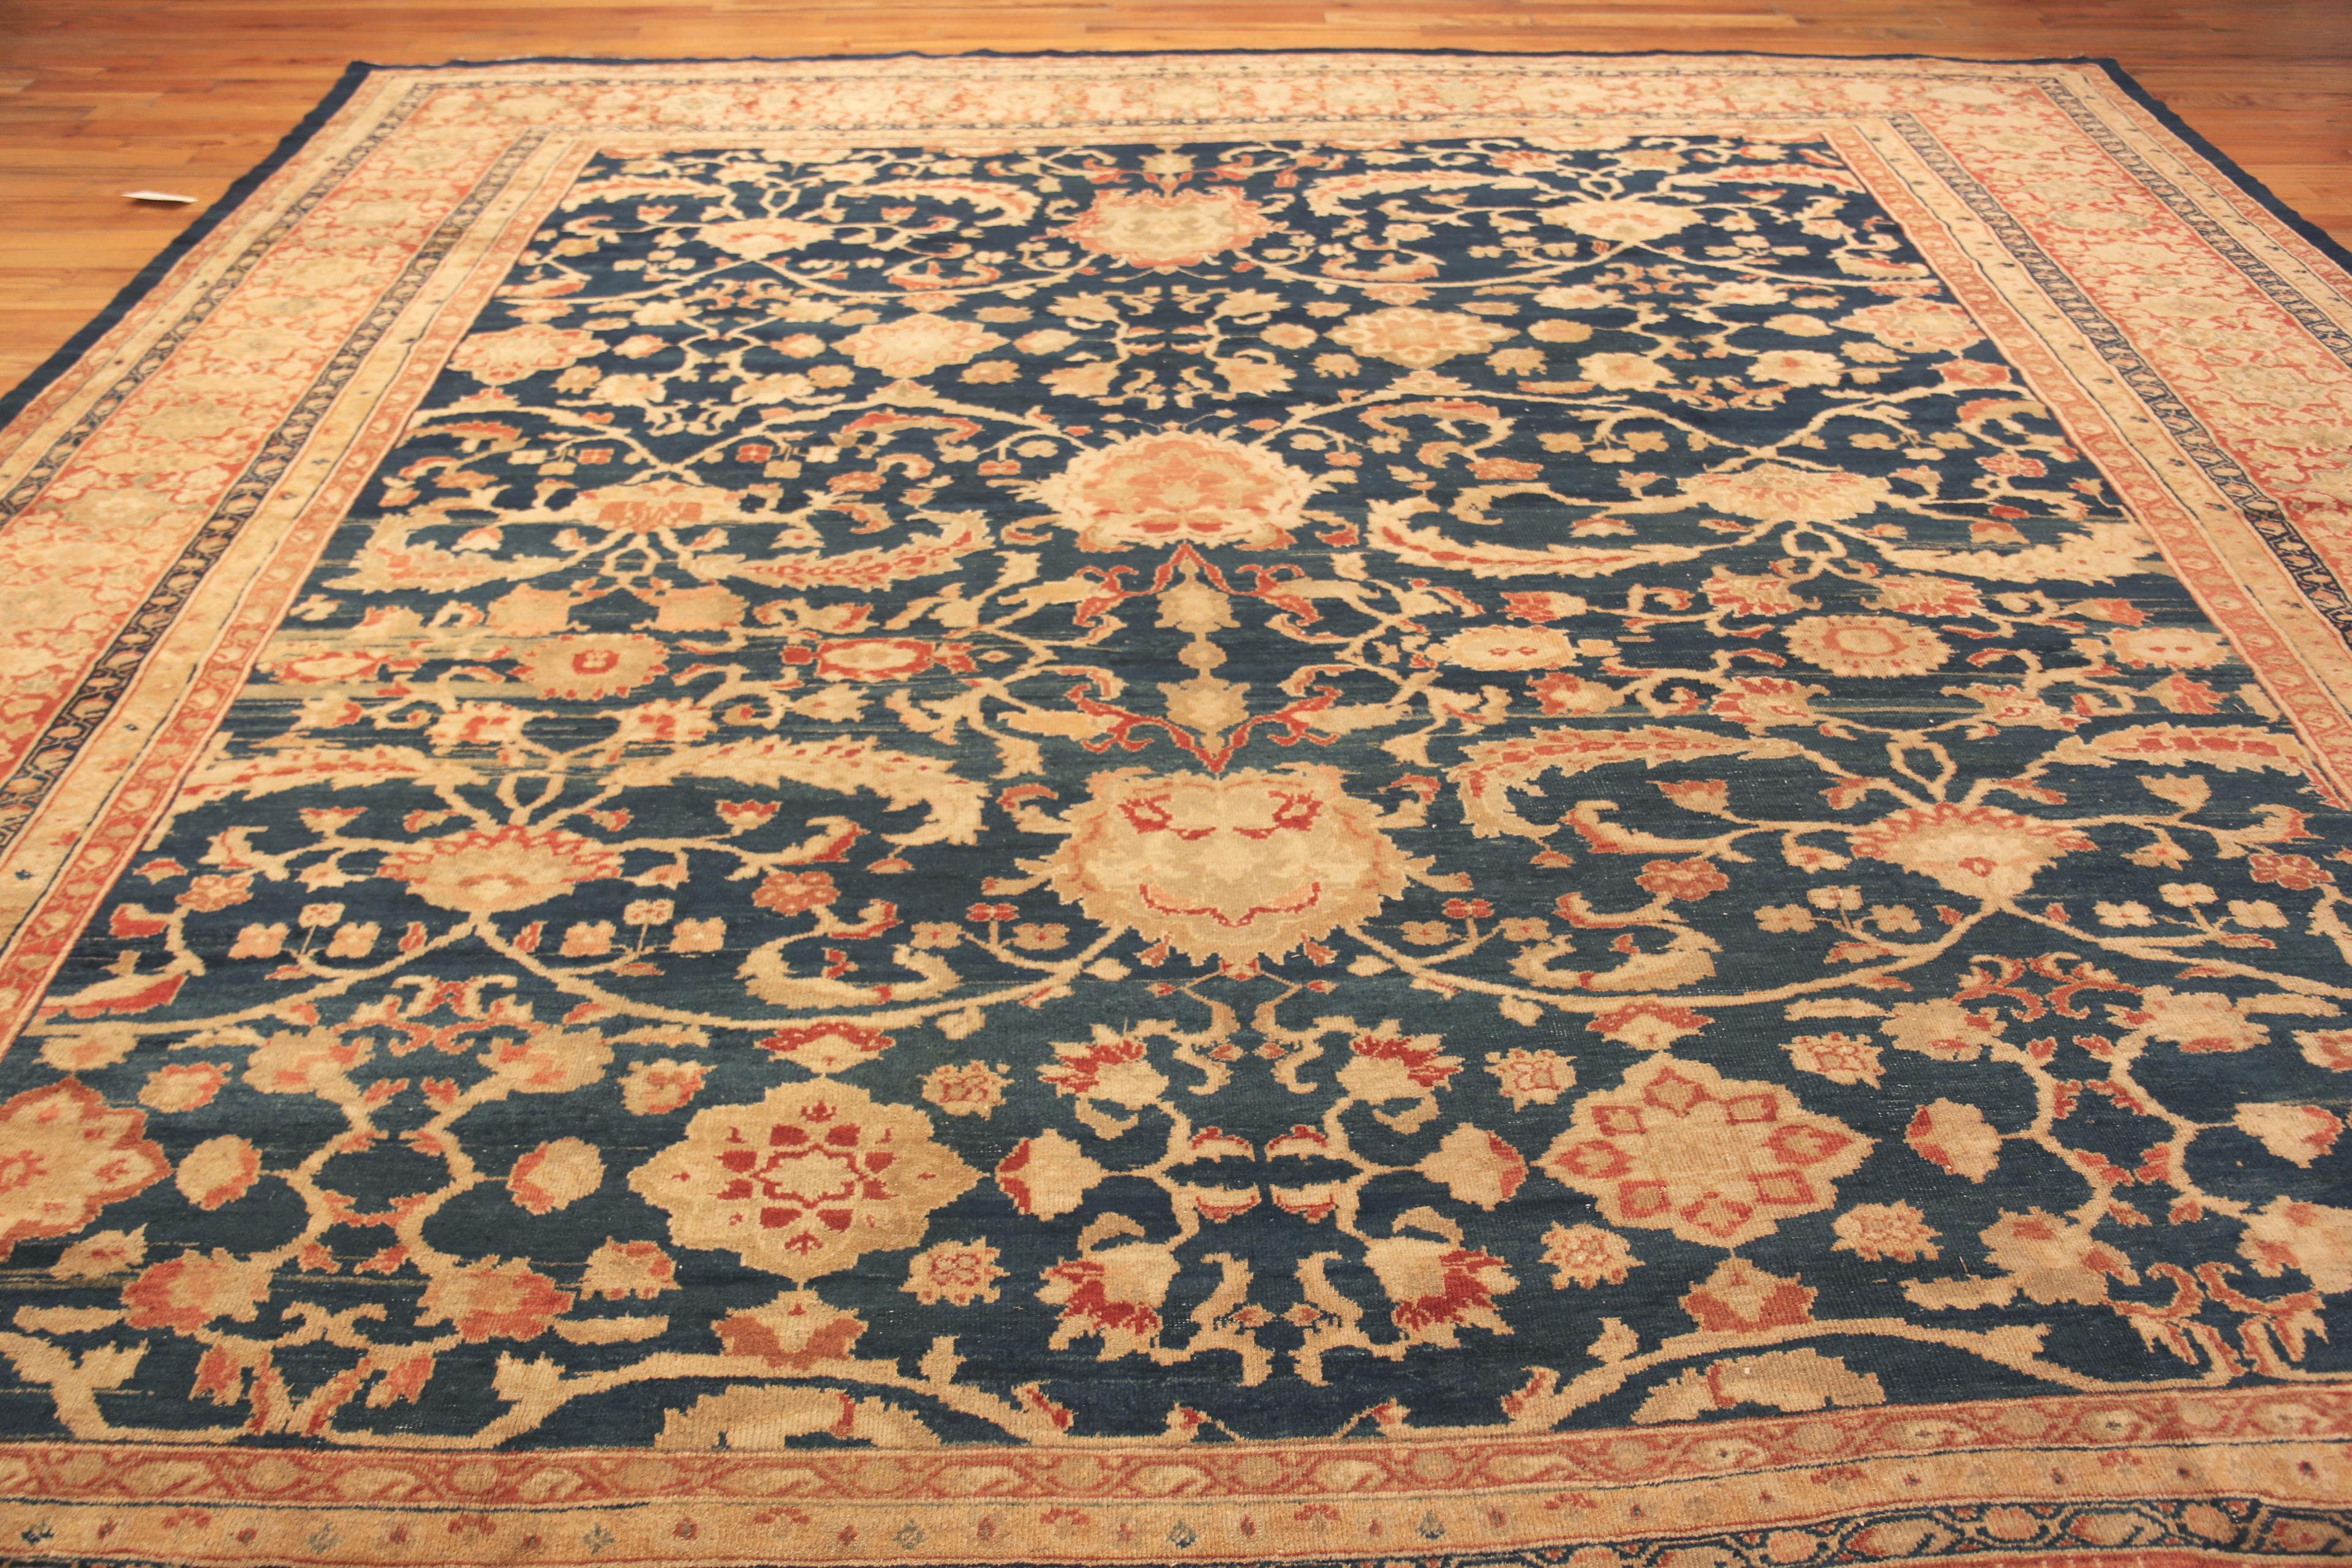 Impressive Blue Background Antique Persian Sultanabad Rug, Country of Origin: Persia, Circa date: 1890 – Sultanabad holds a unique place in the world of Persian carpets. Until 1808, it was known as the city of Arak. The area has a long history of